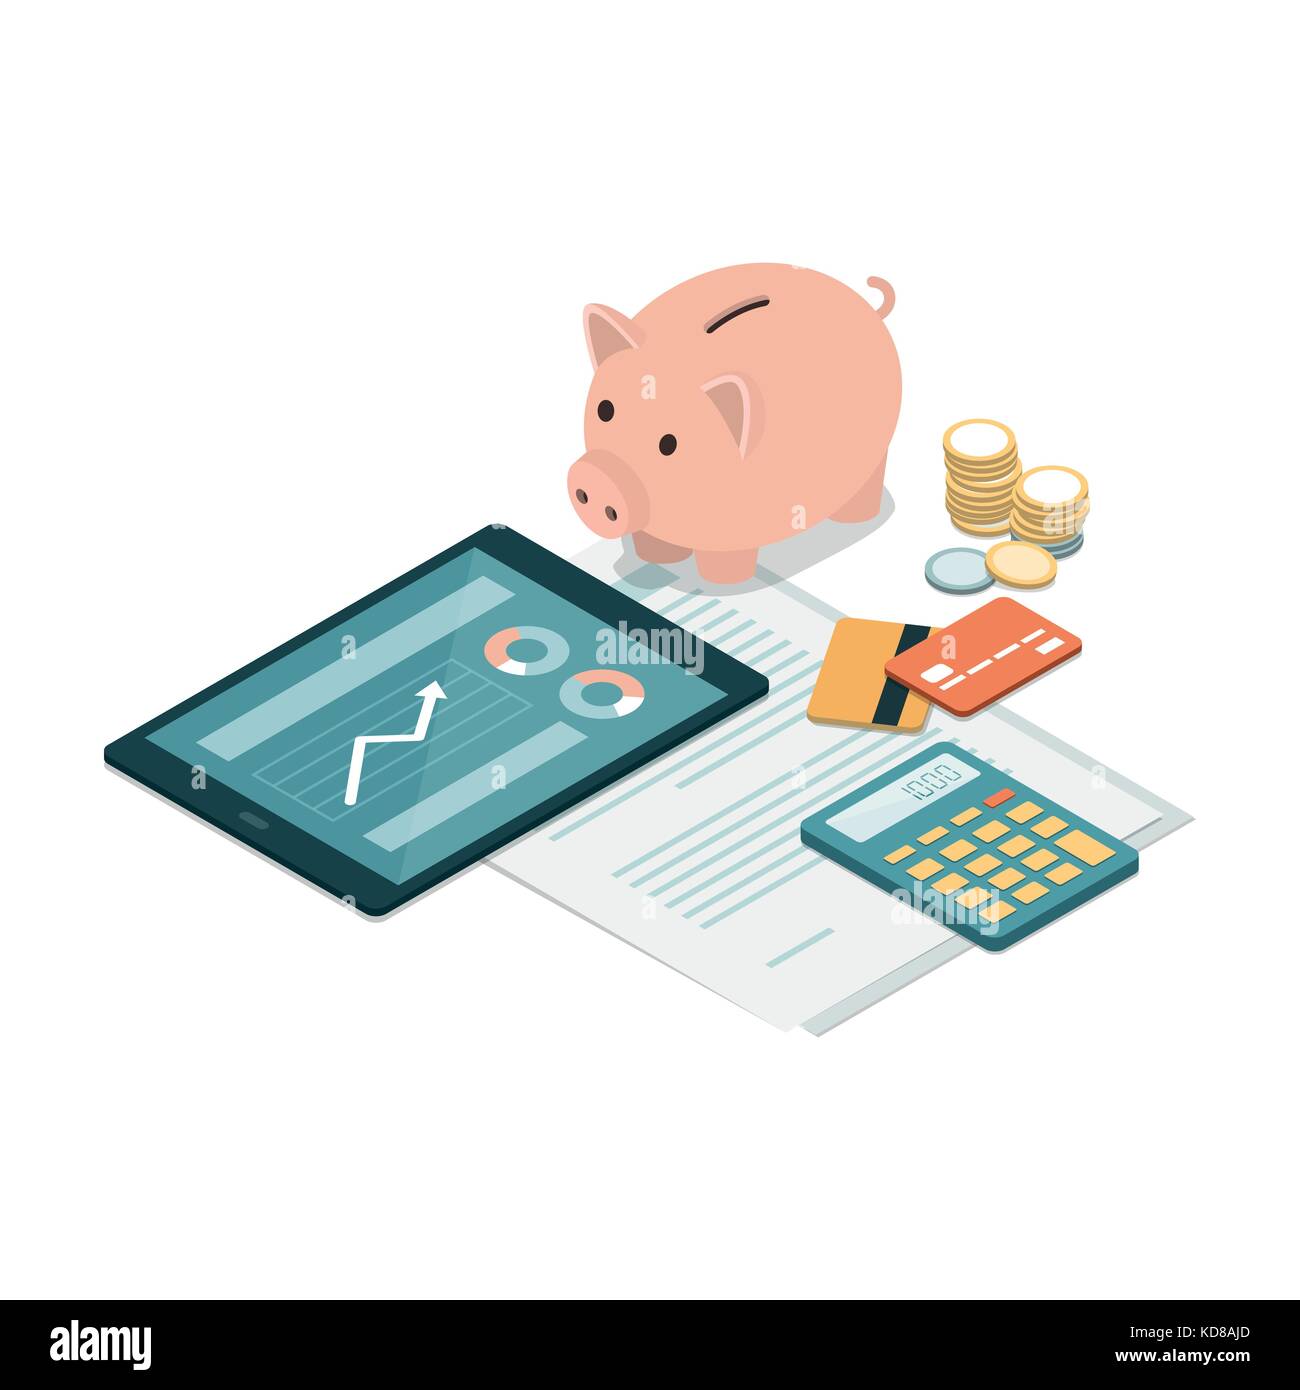 Piggy bank, credit cards, tablet, calculator and money on a financial contract: deposit, funds, savings and investments concept Stock Vector